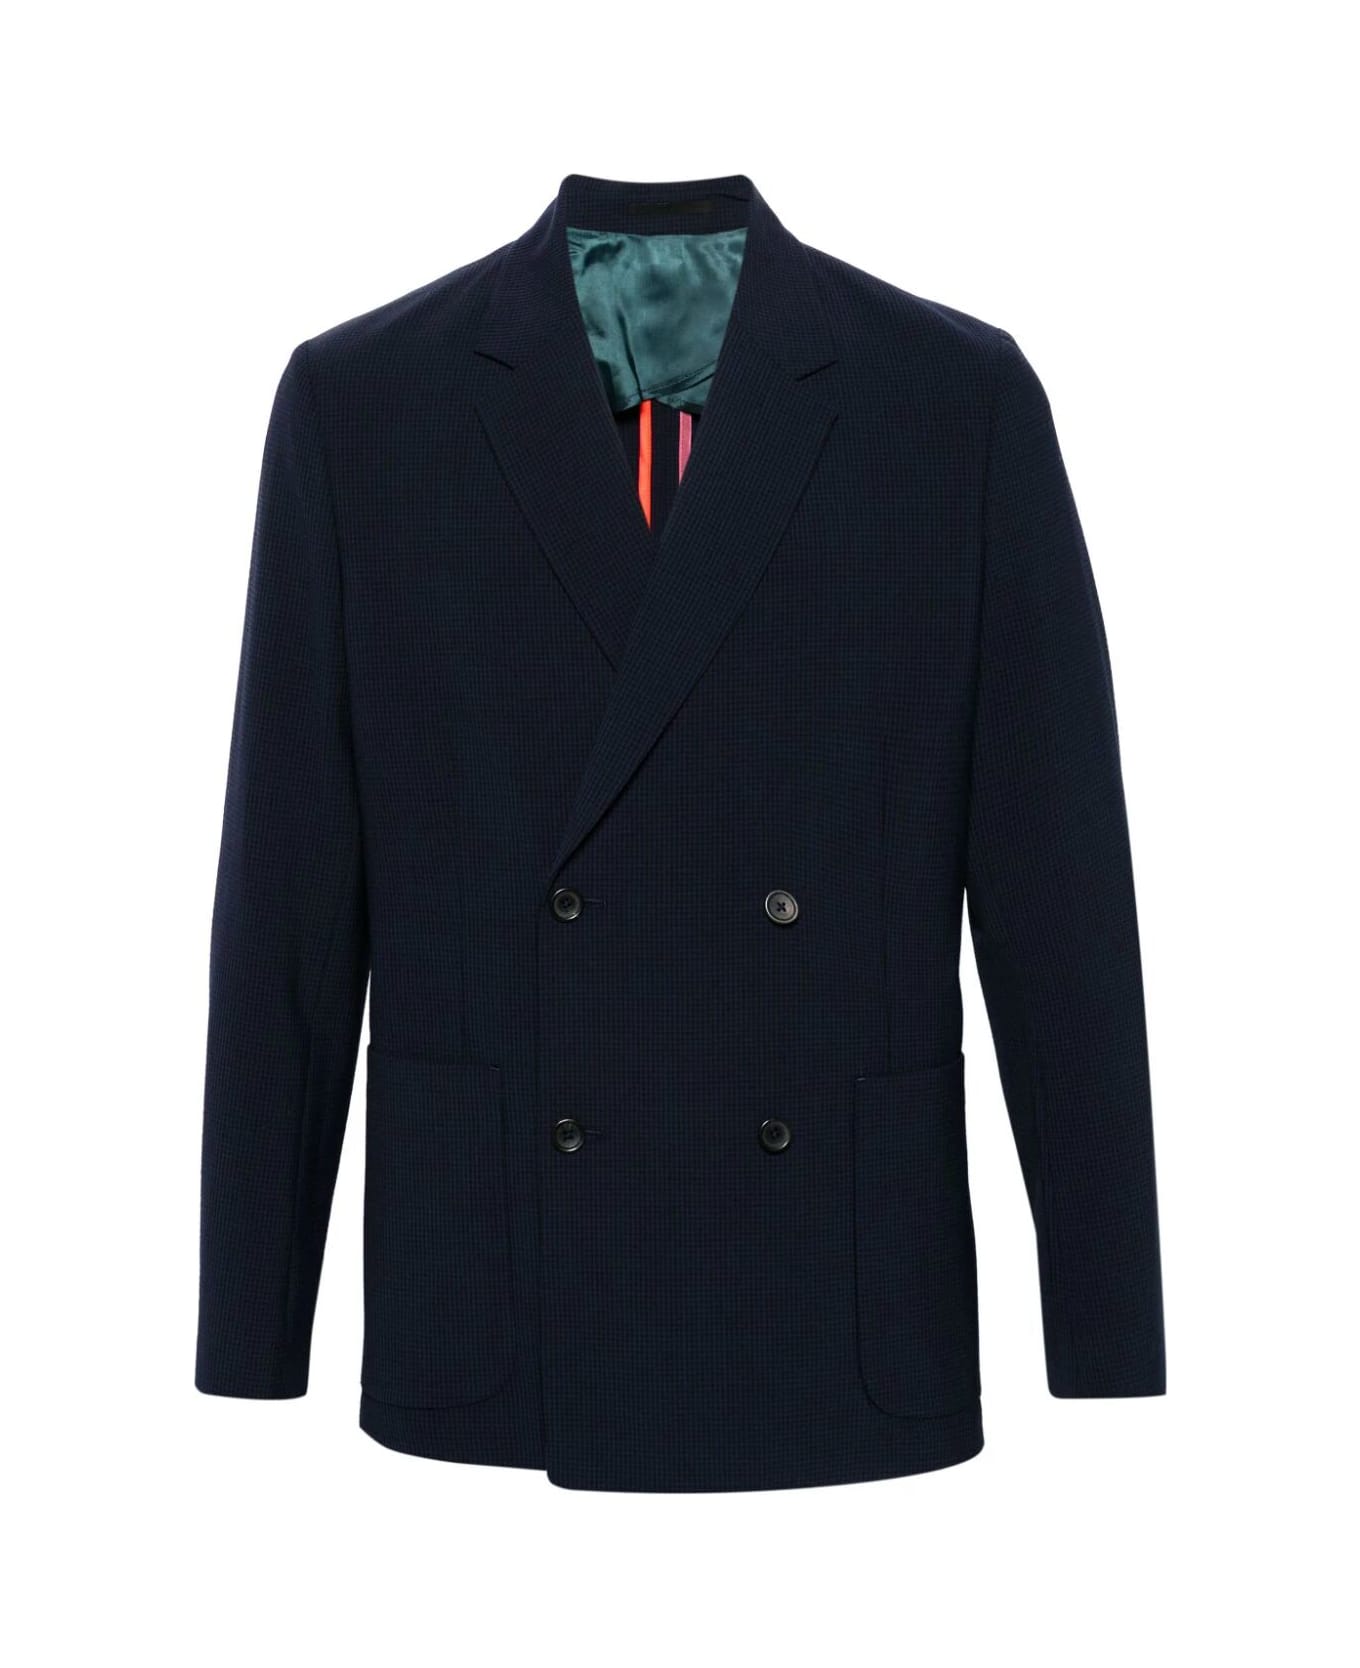 PS by Paul Smith Mens Jacket Double Breasted - Blues ブレザー